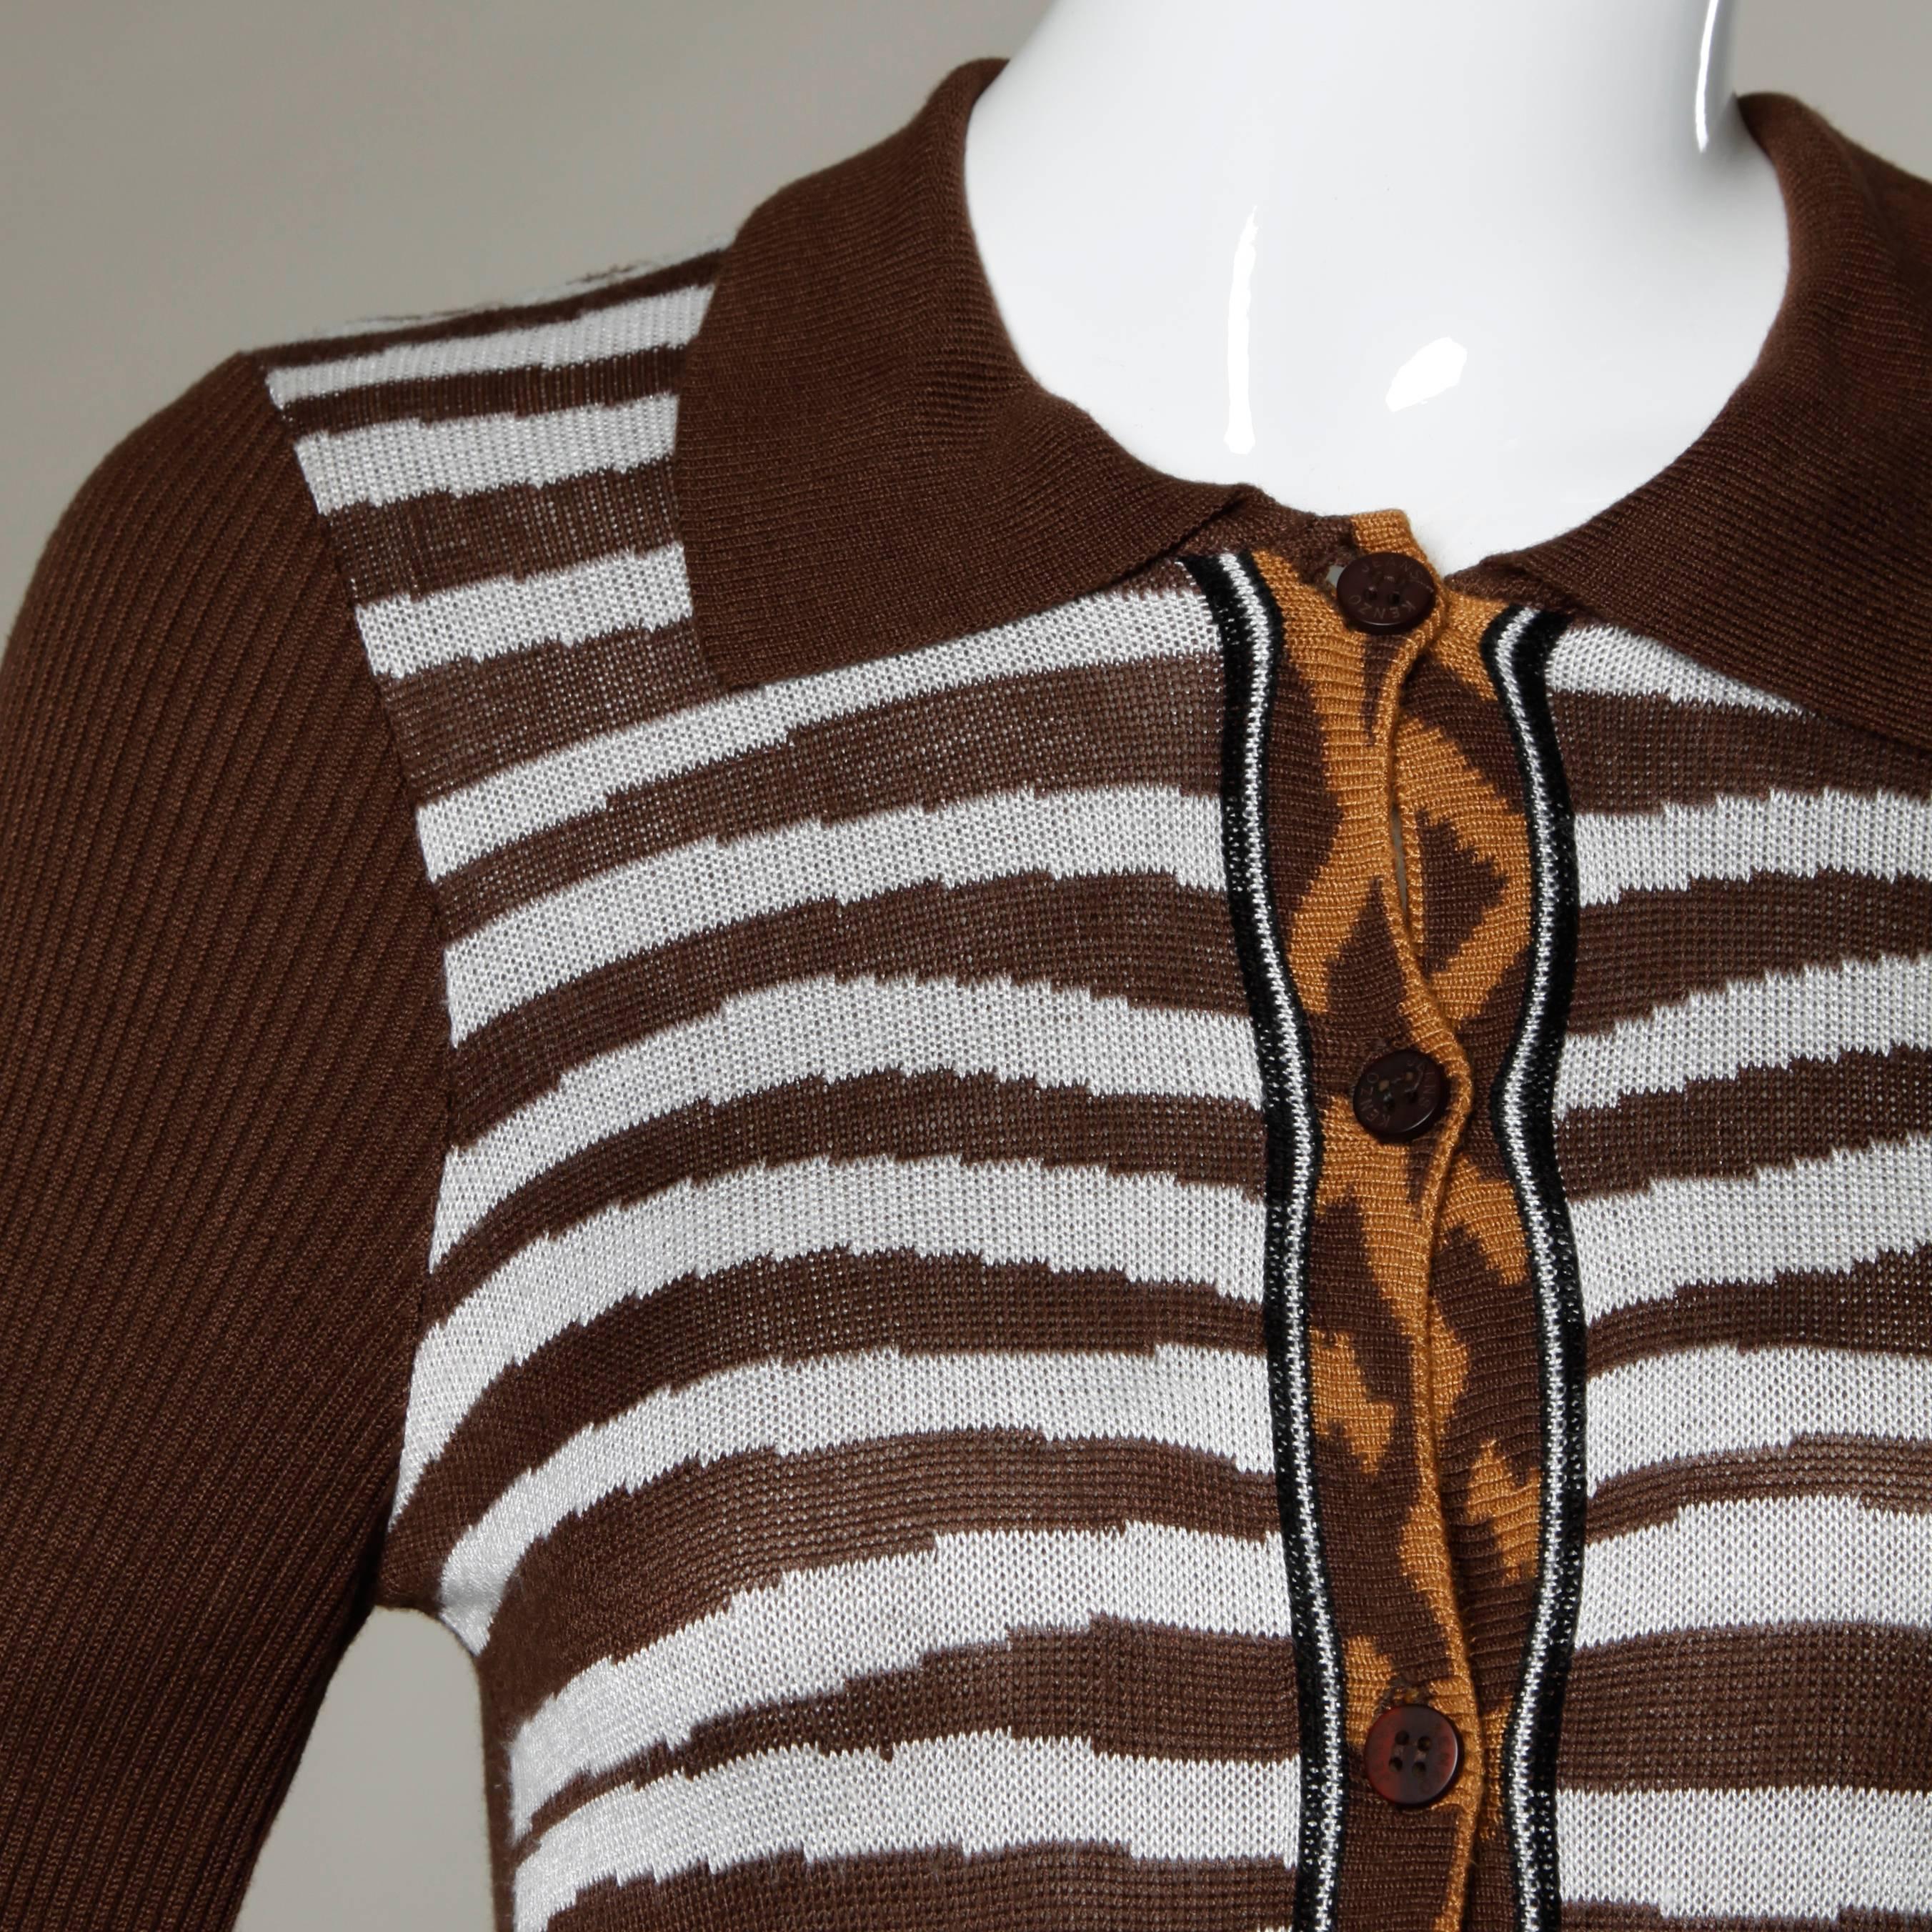 Kenzo Animal Print Button Up Knit Cardigan Sweater In Excellent Condition In Sparks, NV